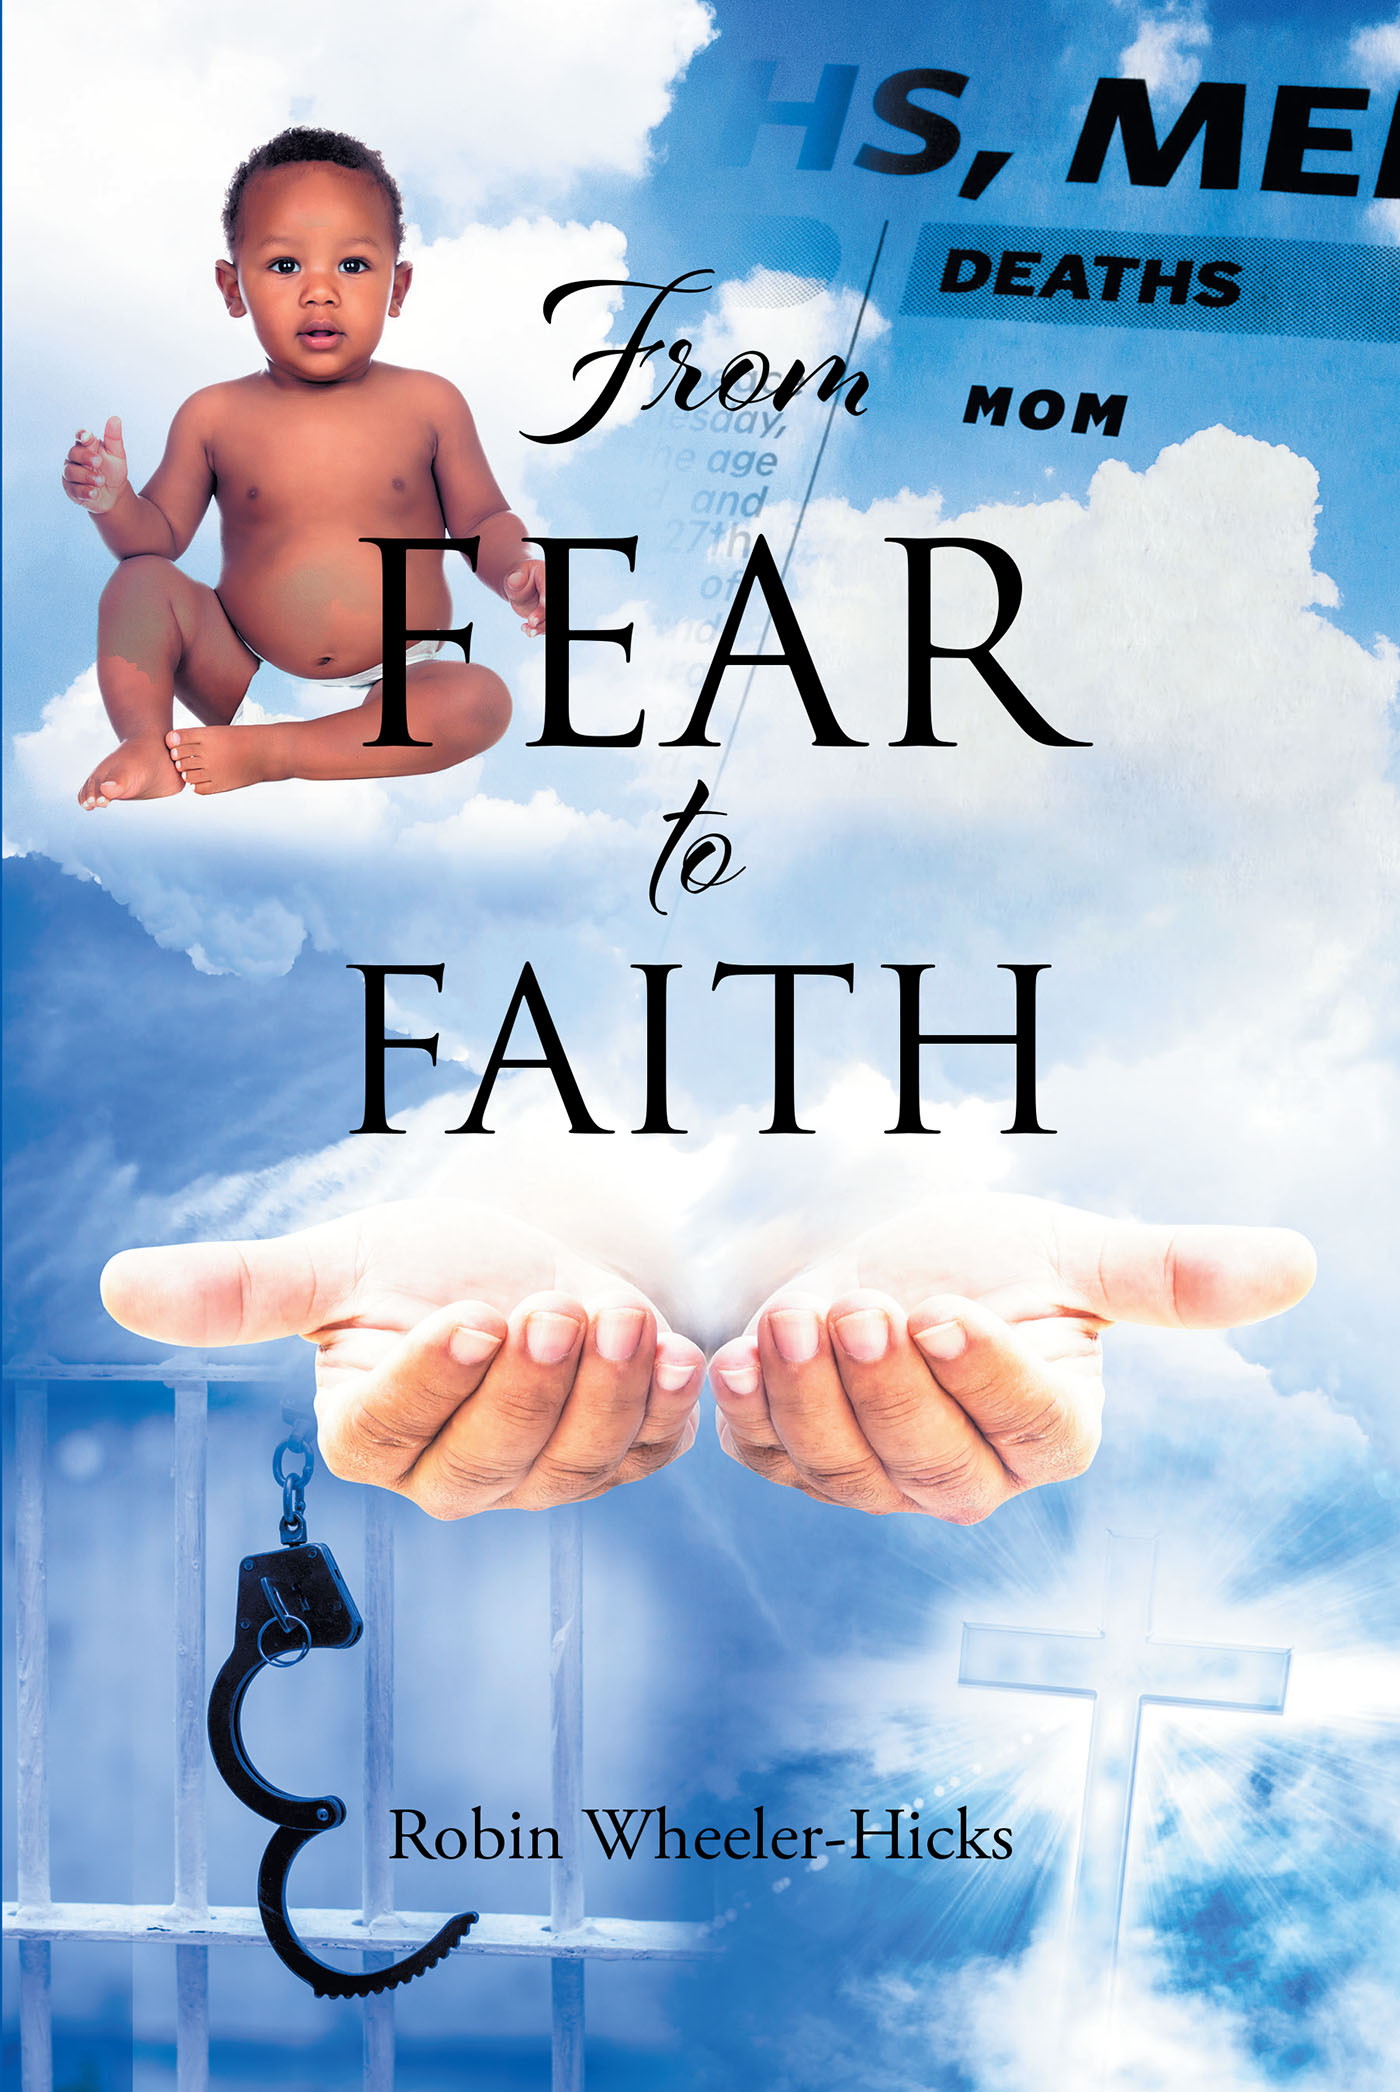 Robin Wheeler-Hicks’s Newly Released "From Fear to Faith" is a Powerful Story of a Woman’s Journey Back to Christ